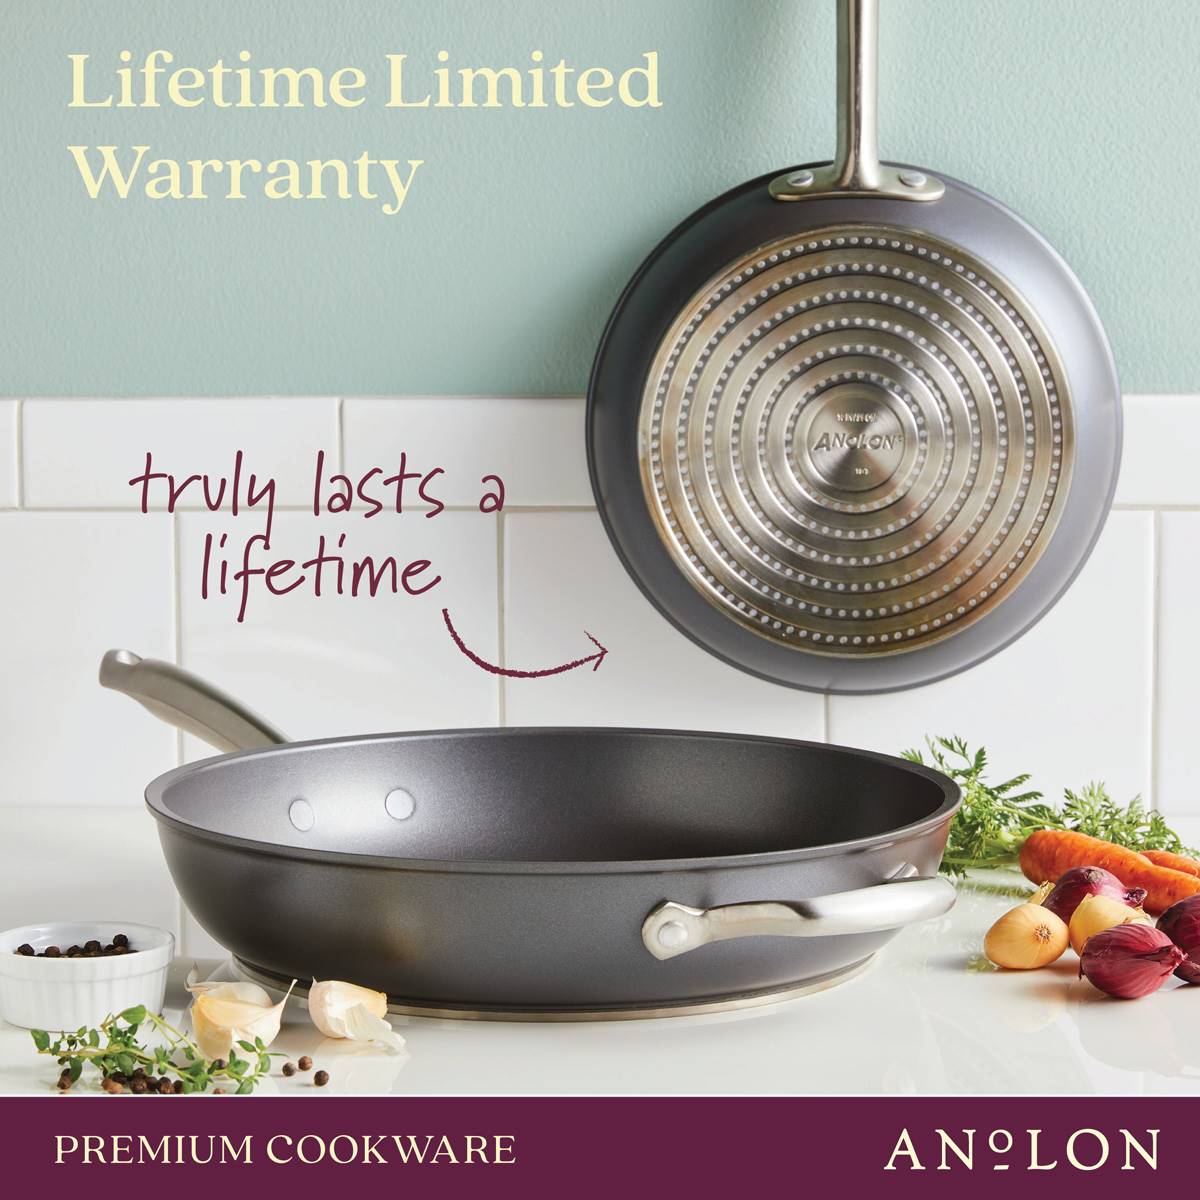 Anolon(R) Accolade 10pc. Hard-Anodized Nonstick Cookware Set